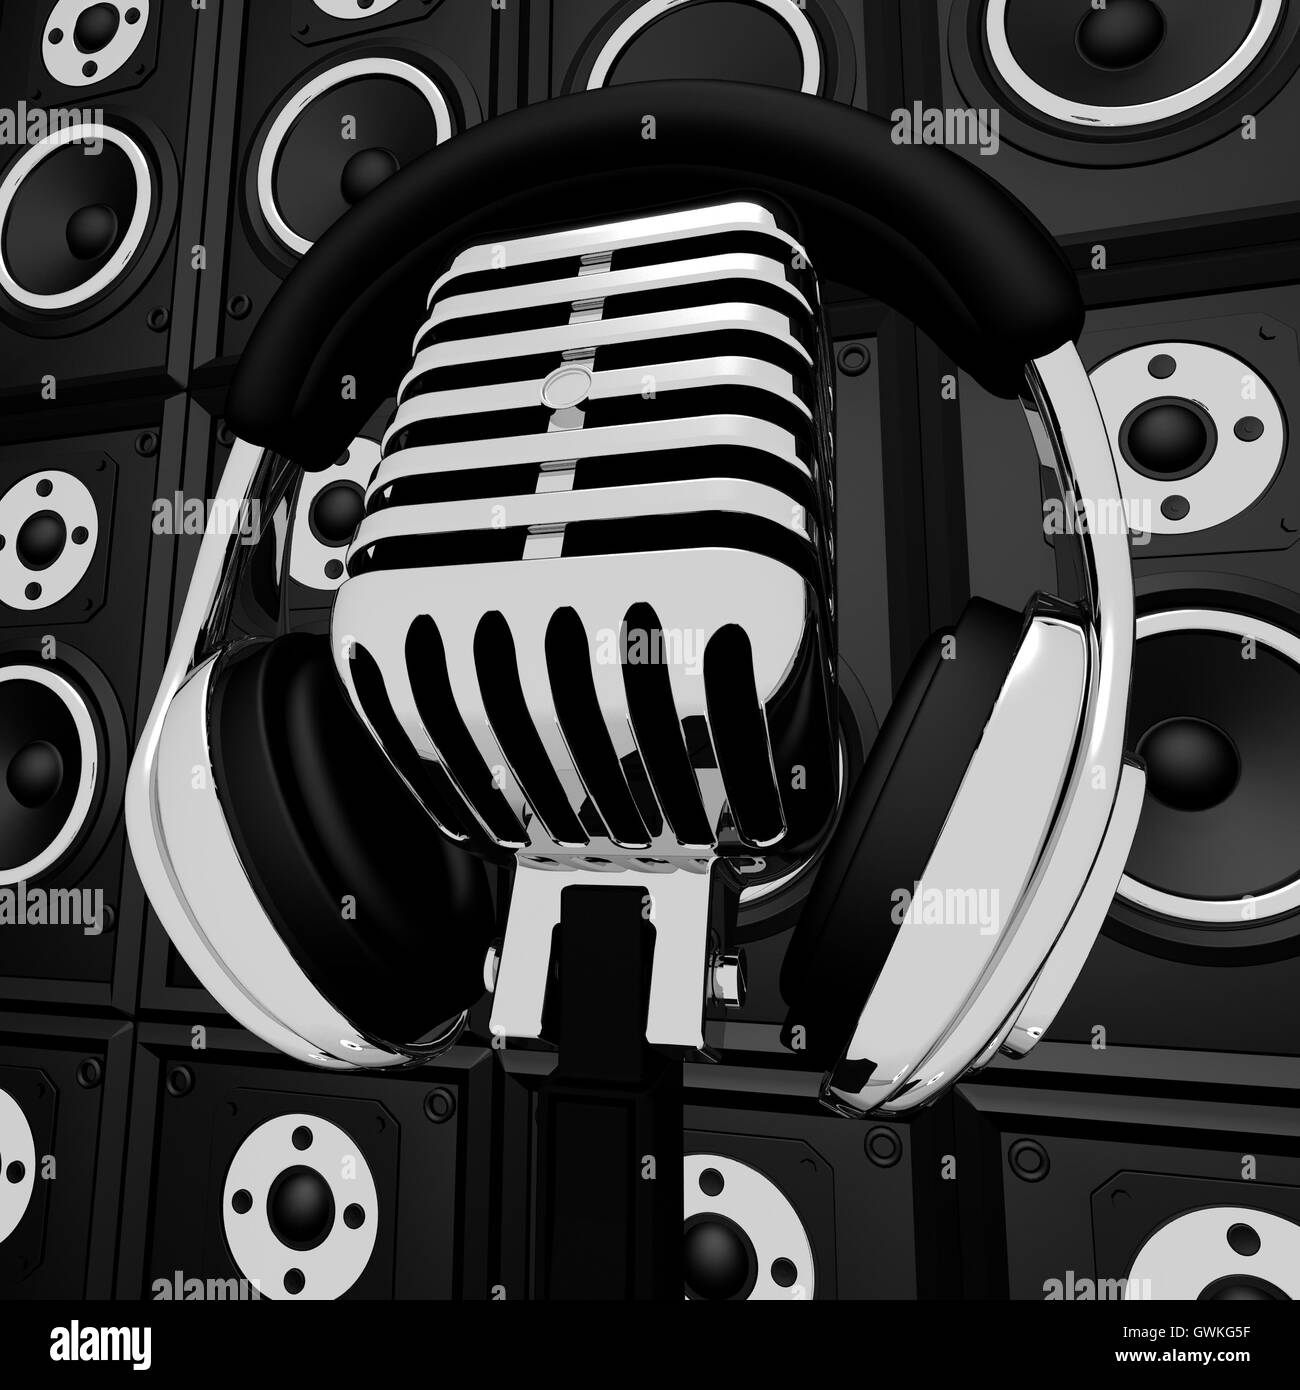 Headphones Microphone And Speakers Show Musician Recording Or En Stock Photo